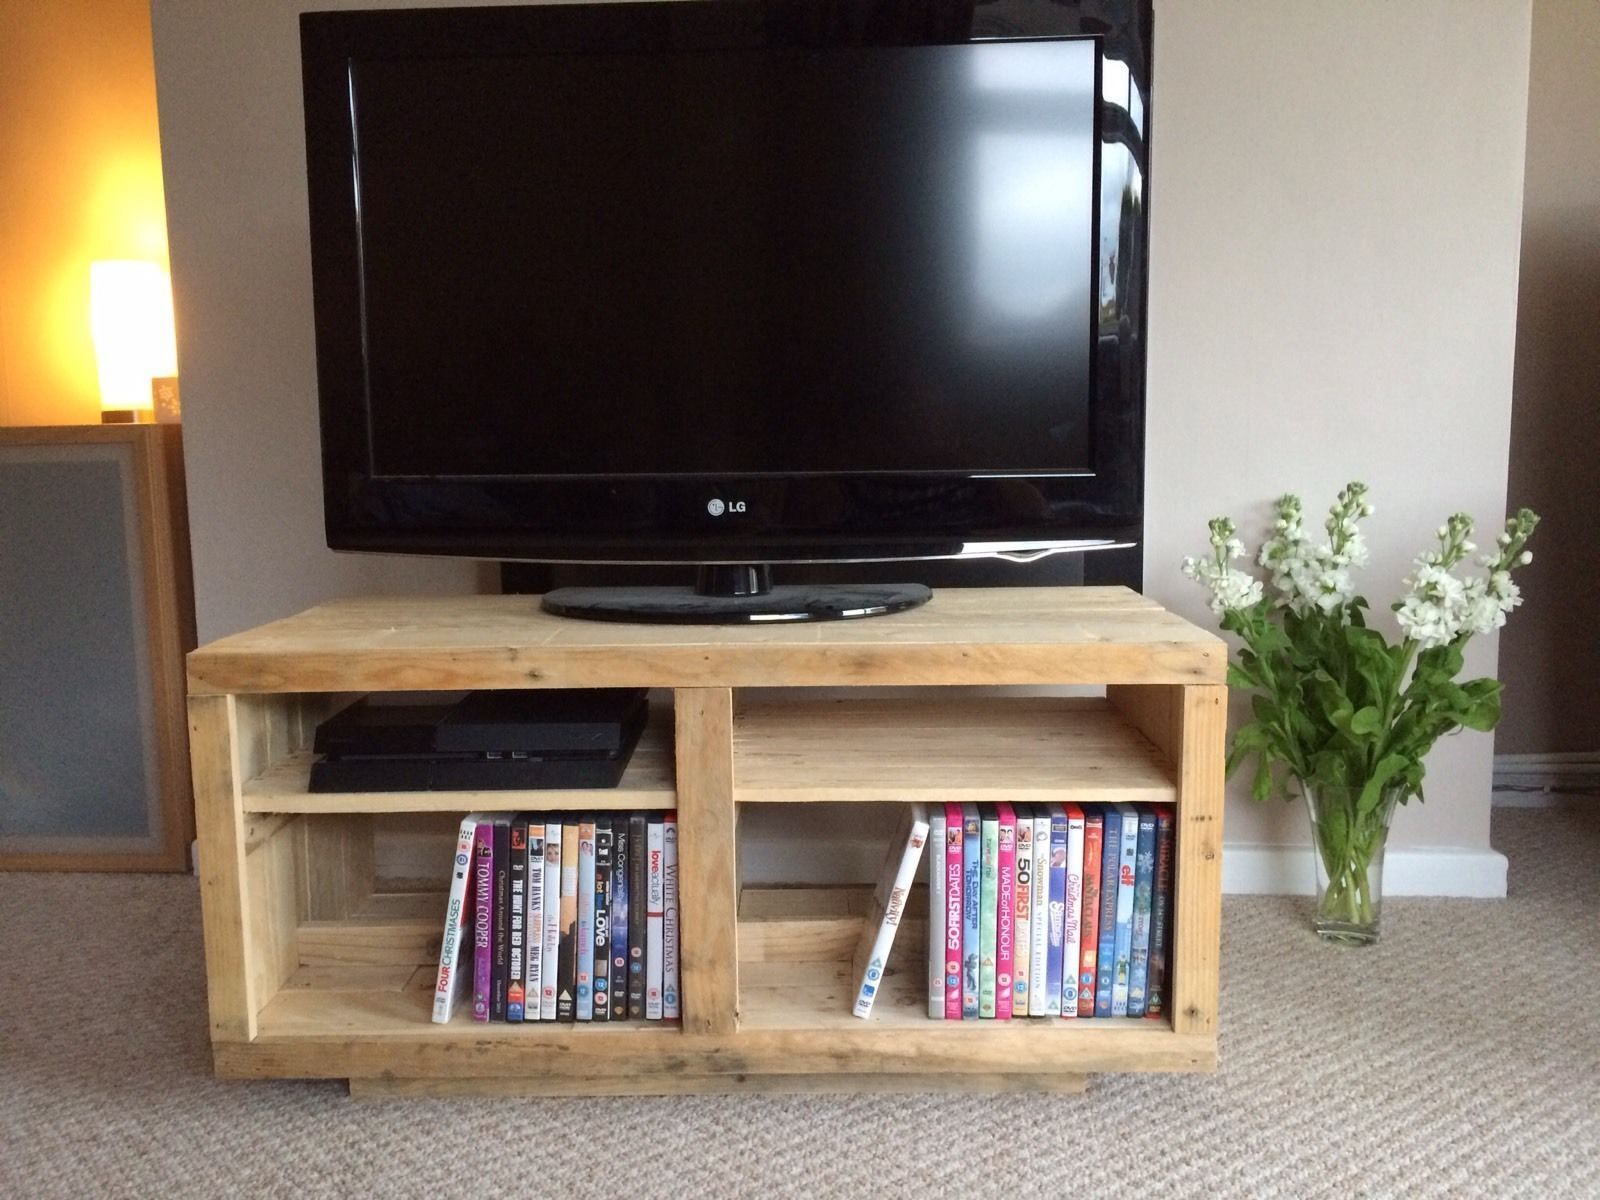 How to Build a TV Stand Out of Wood | eBay